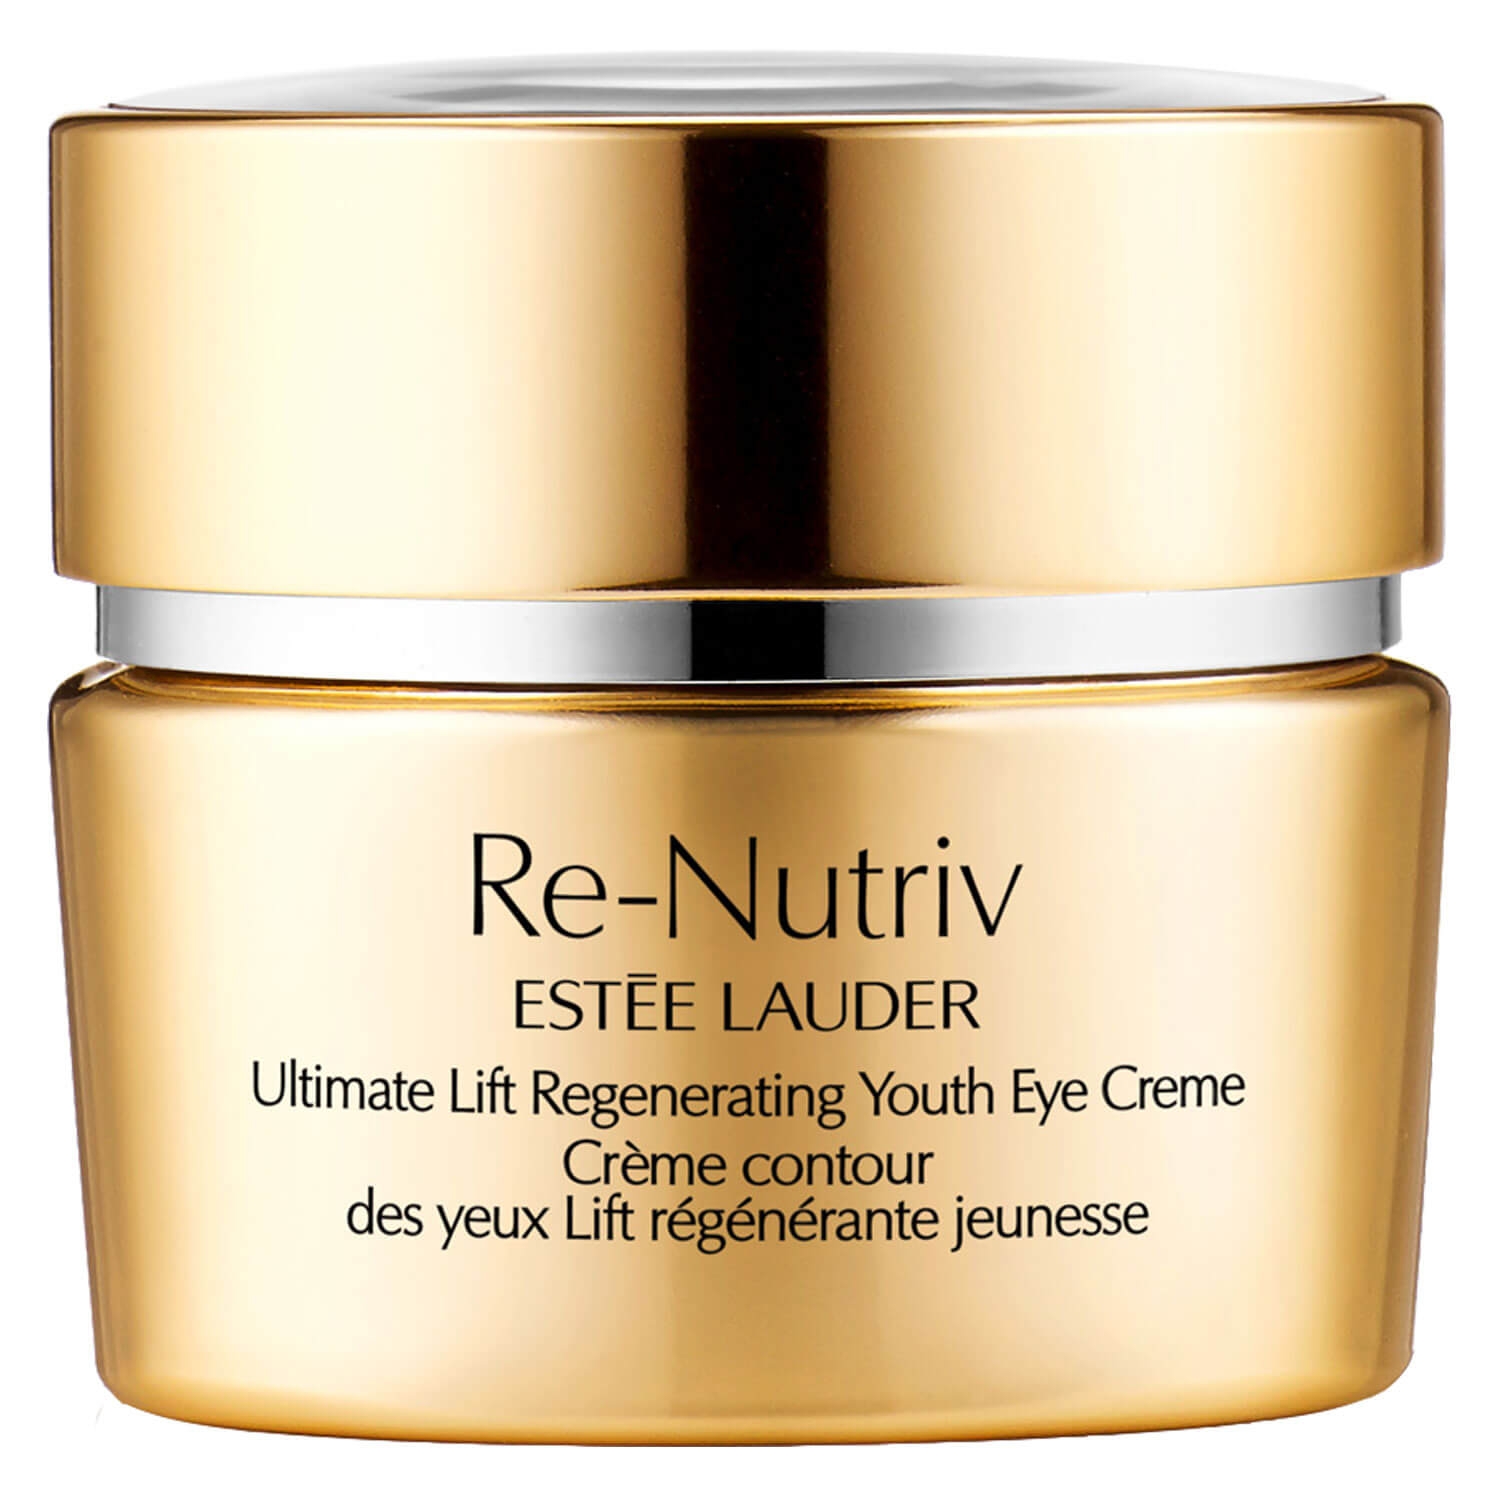 Product image from Re-Nutriv - Ultimate Lift Regenerating Youth Eye Creme